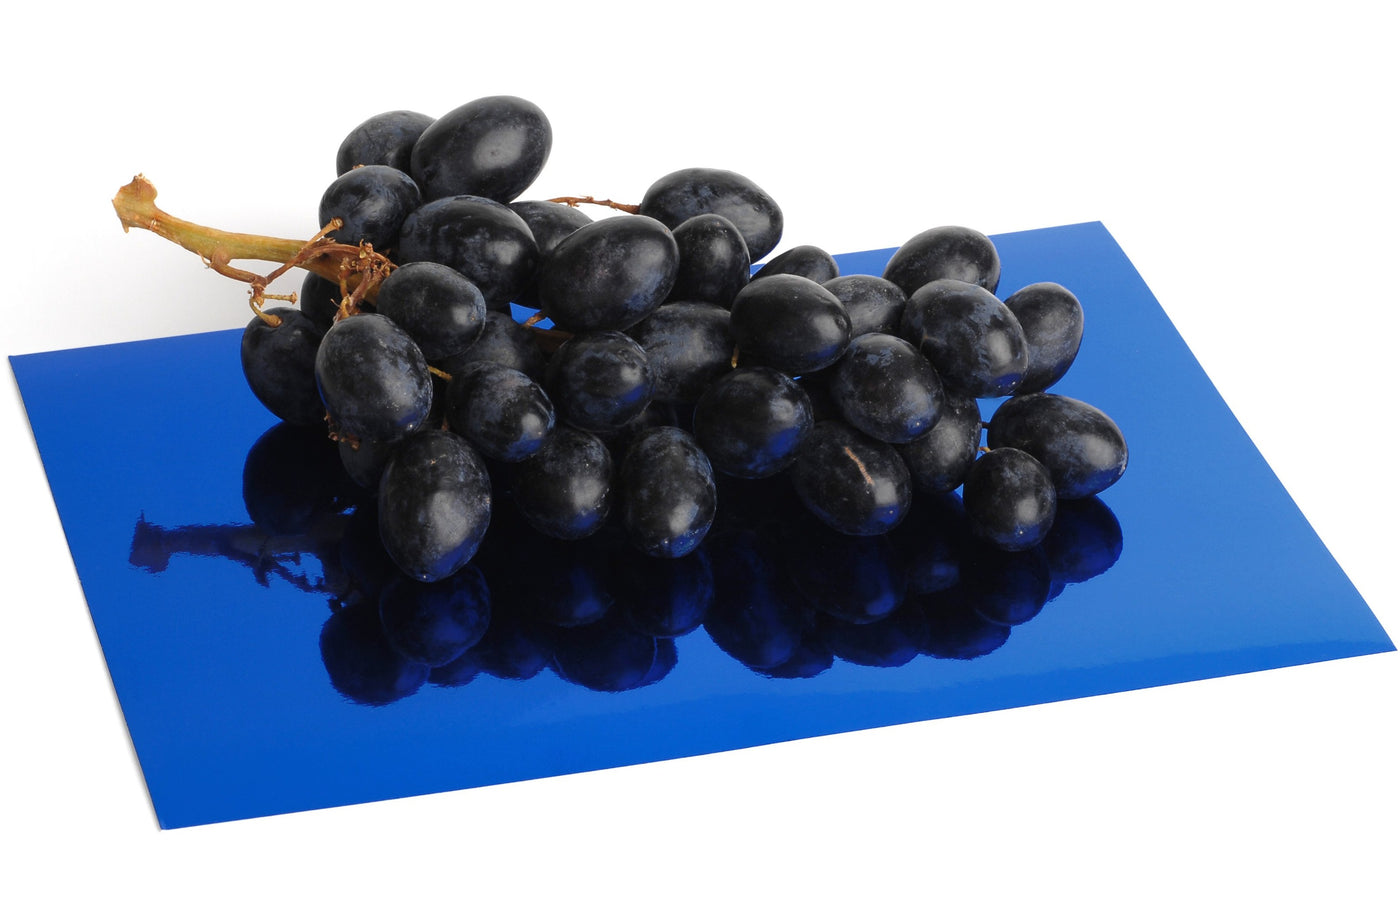 A sheet of deep blue mirrored foil board. Highly reflective with an intense blue color. A bunch of grapes sit atop the mirror foil board and are reflected with near perfect fidelity.